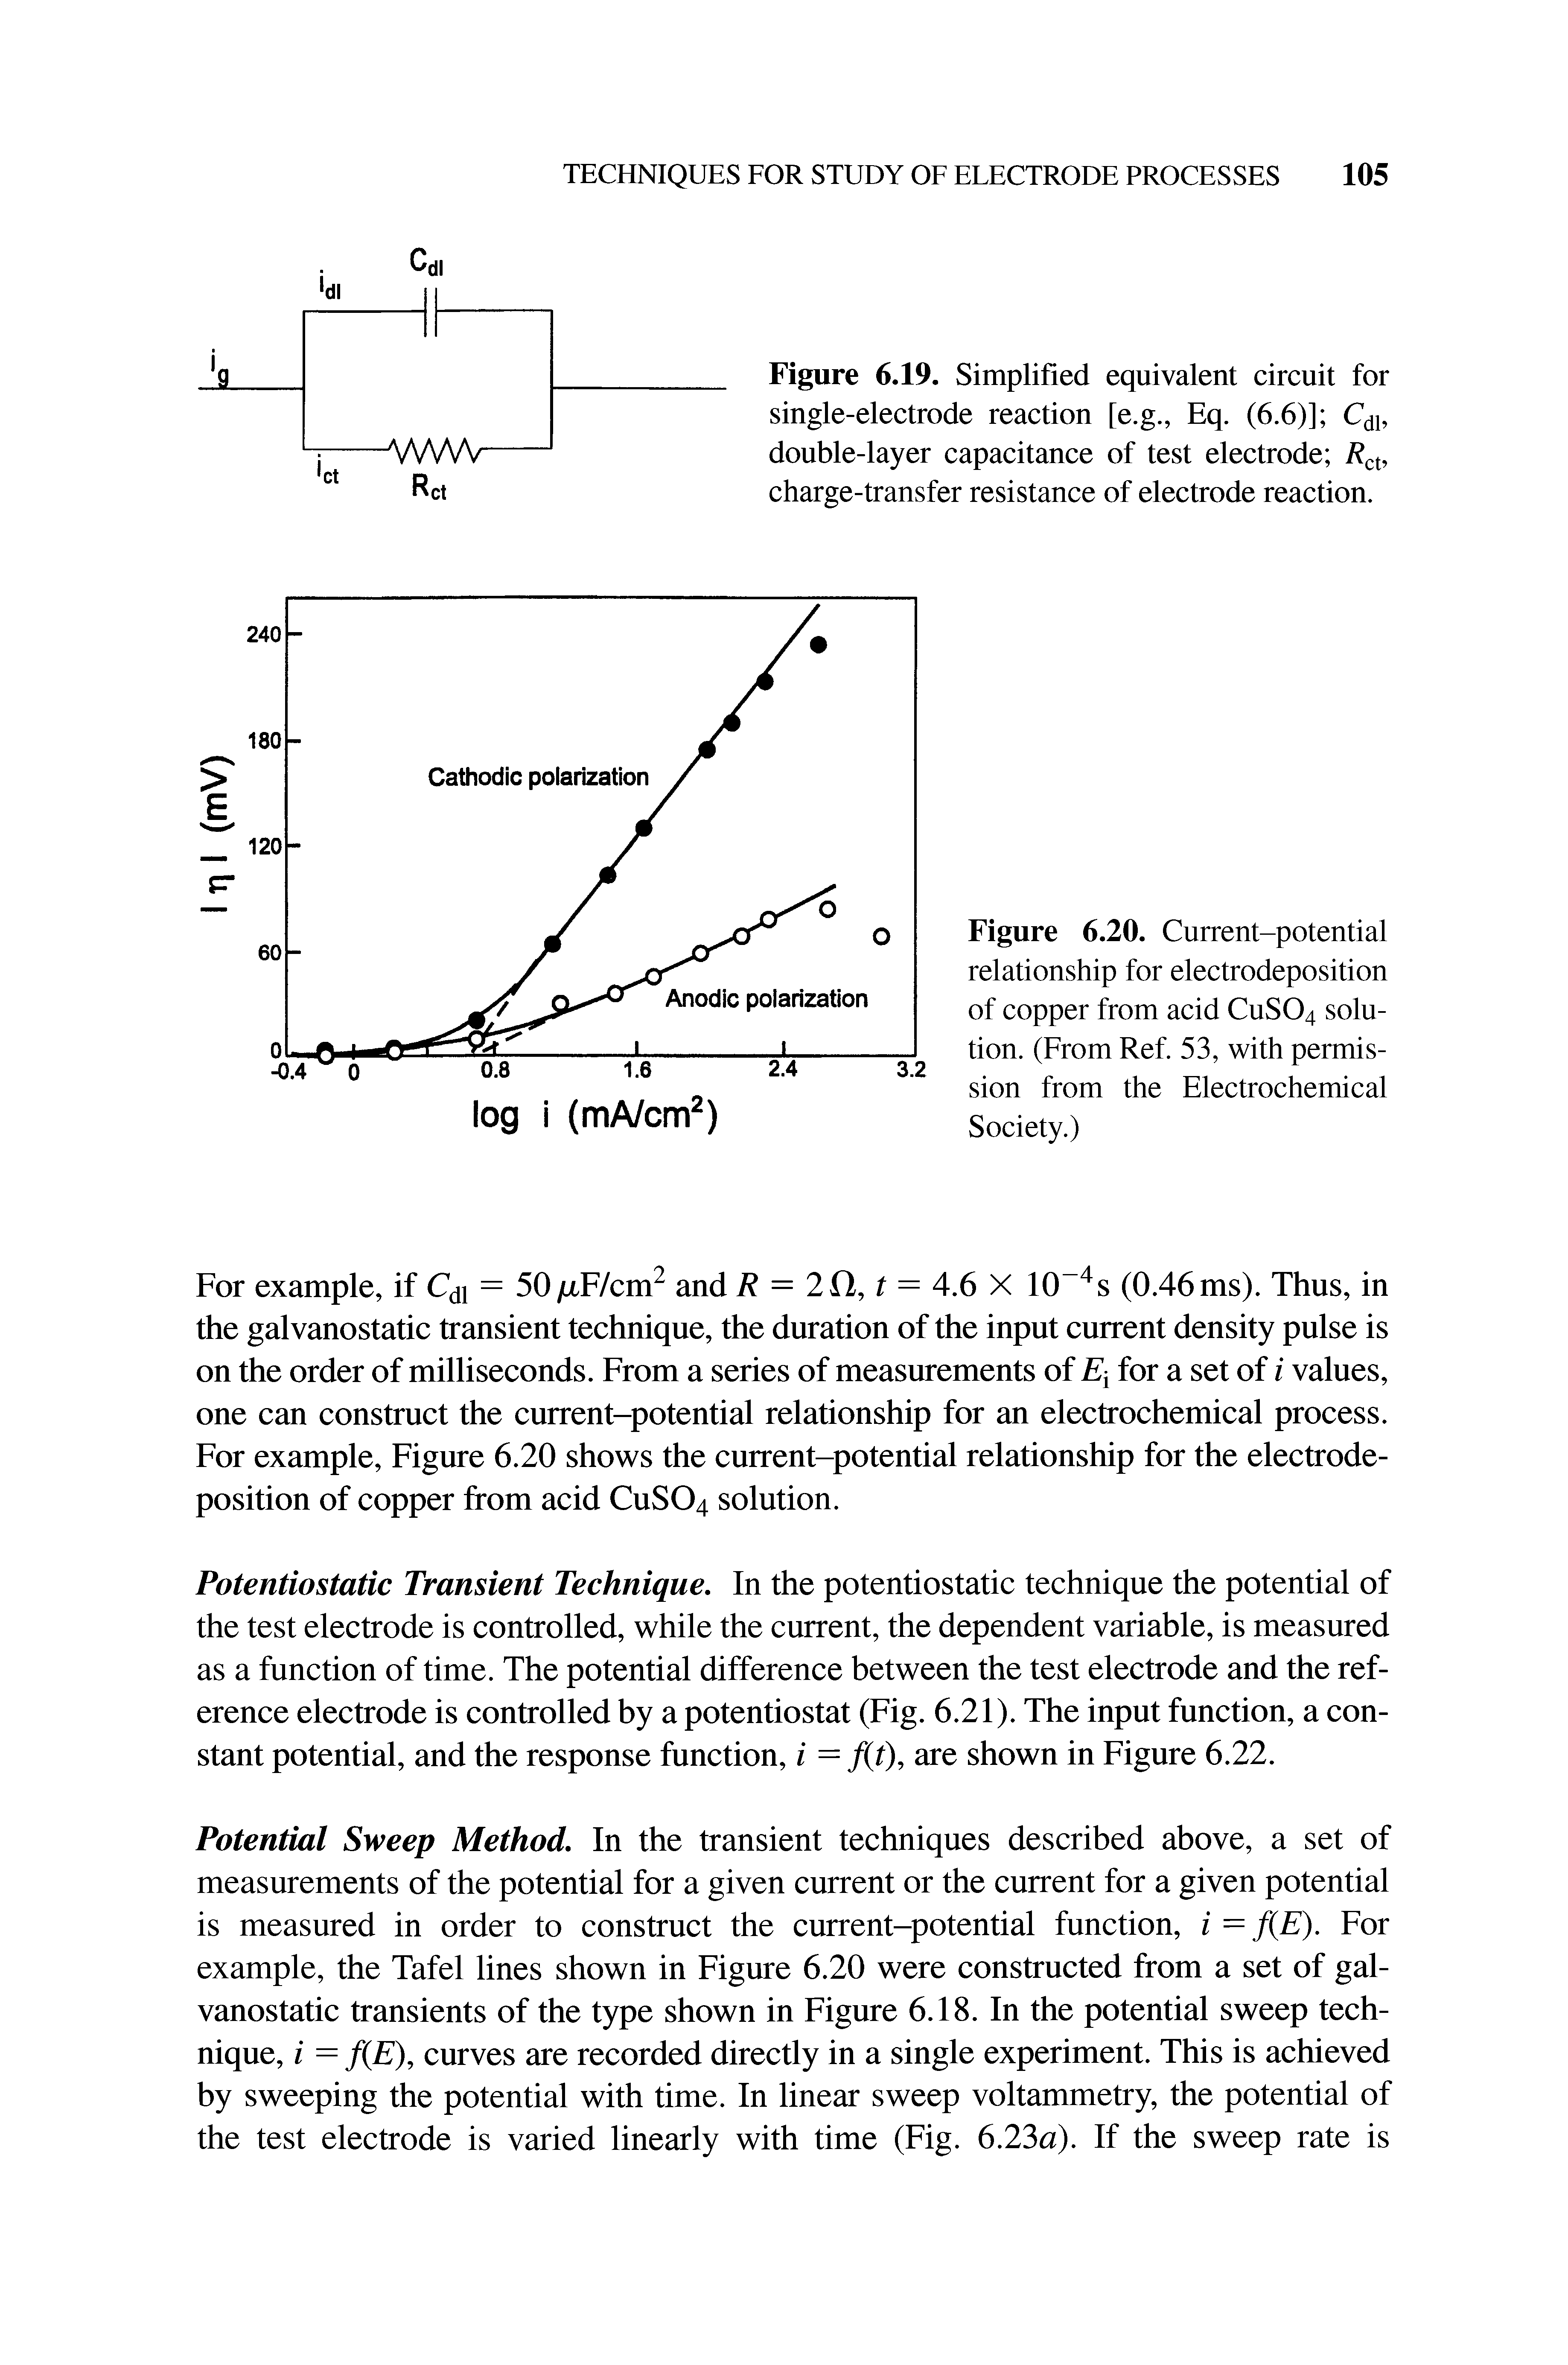 Figure 6.20. Current-potential relationship for electrodeposition of copper from acid CUSO4 solution. (From Ref. 53, with permission from the Electrochemical Society.)...